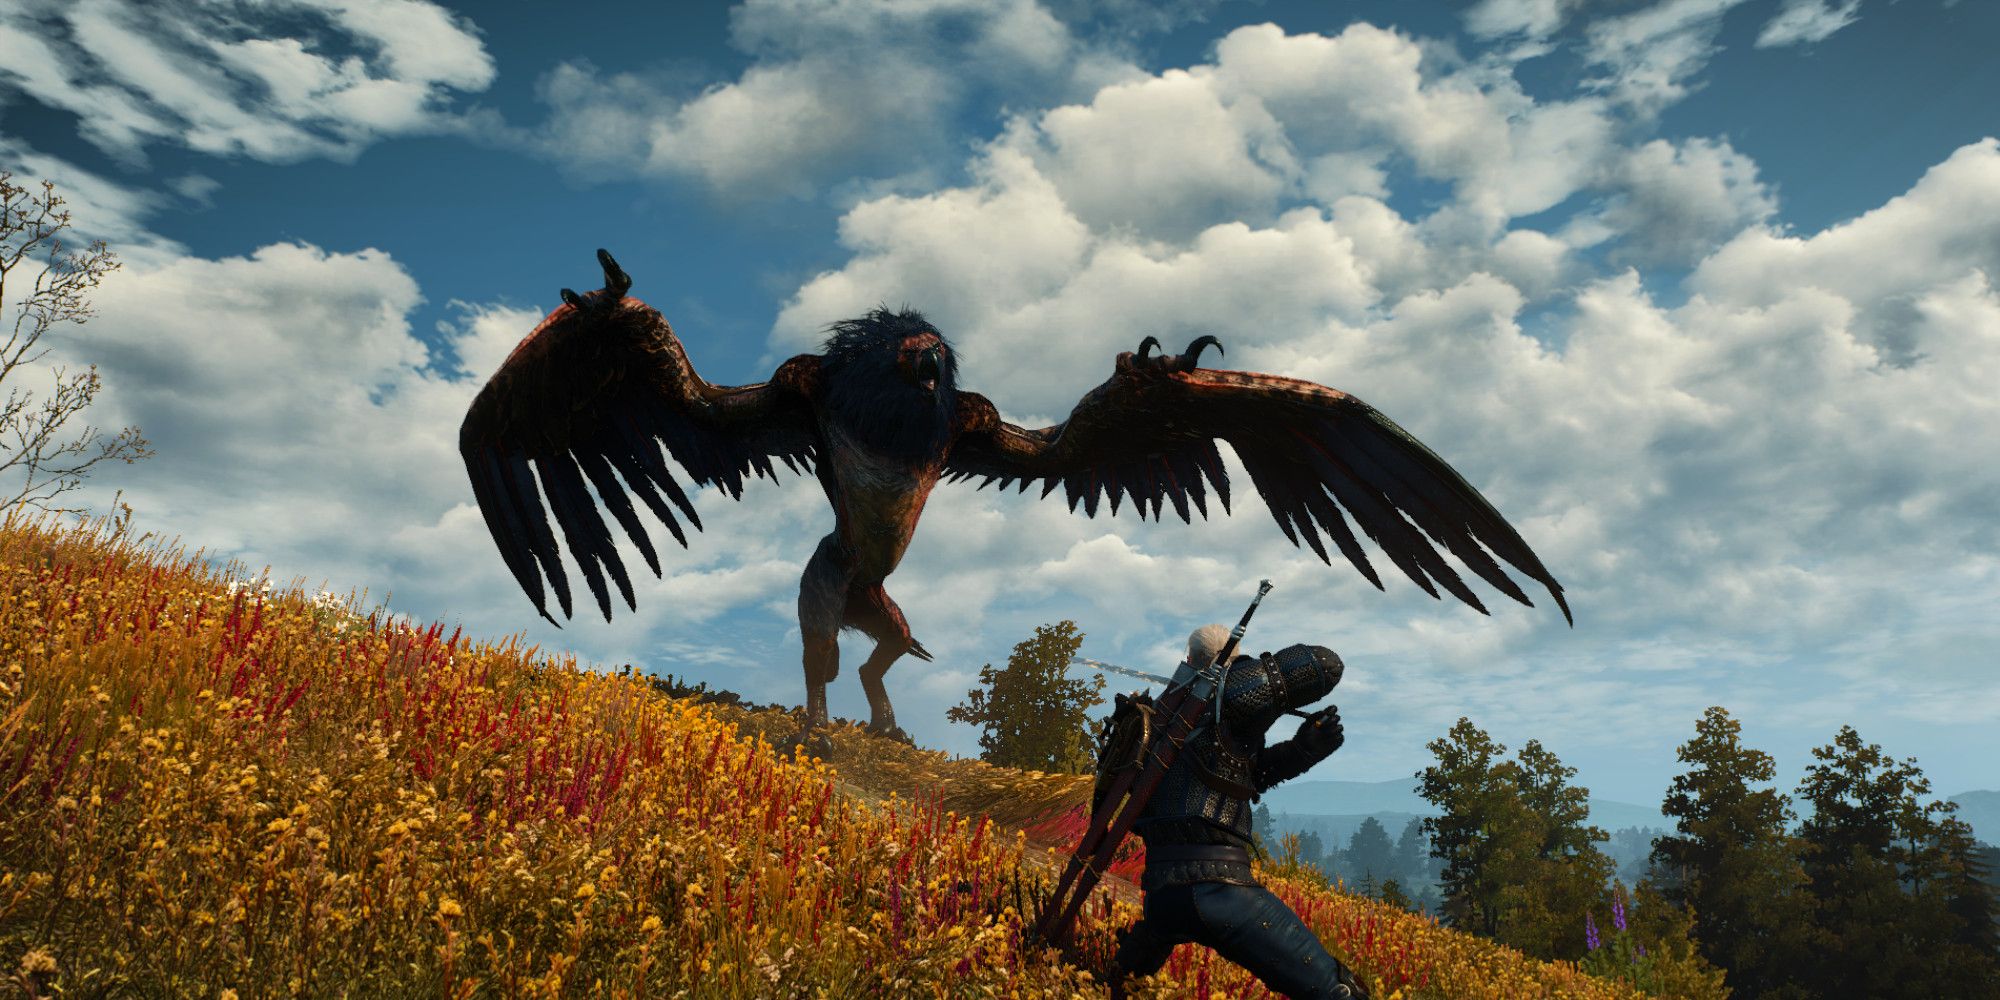 Geralt fights an Archgriffin in a field of flowers